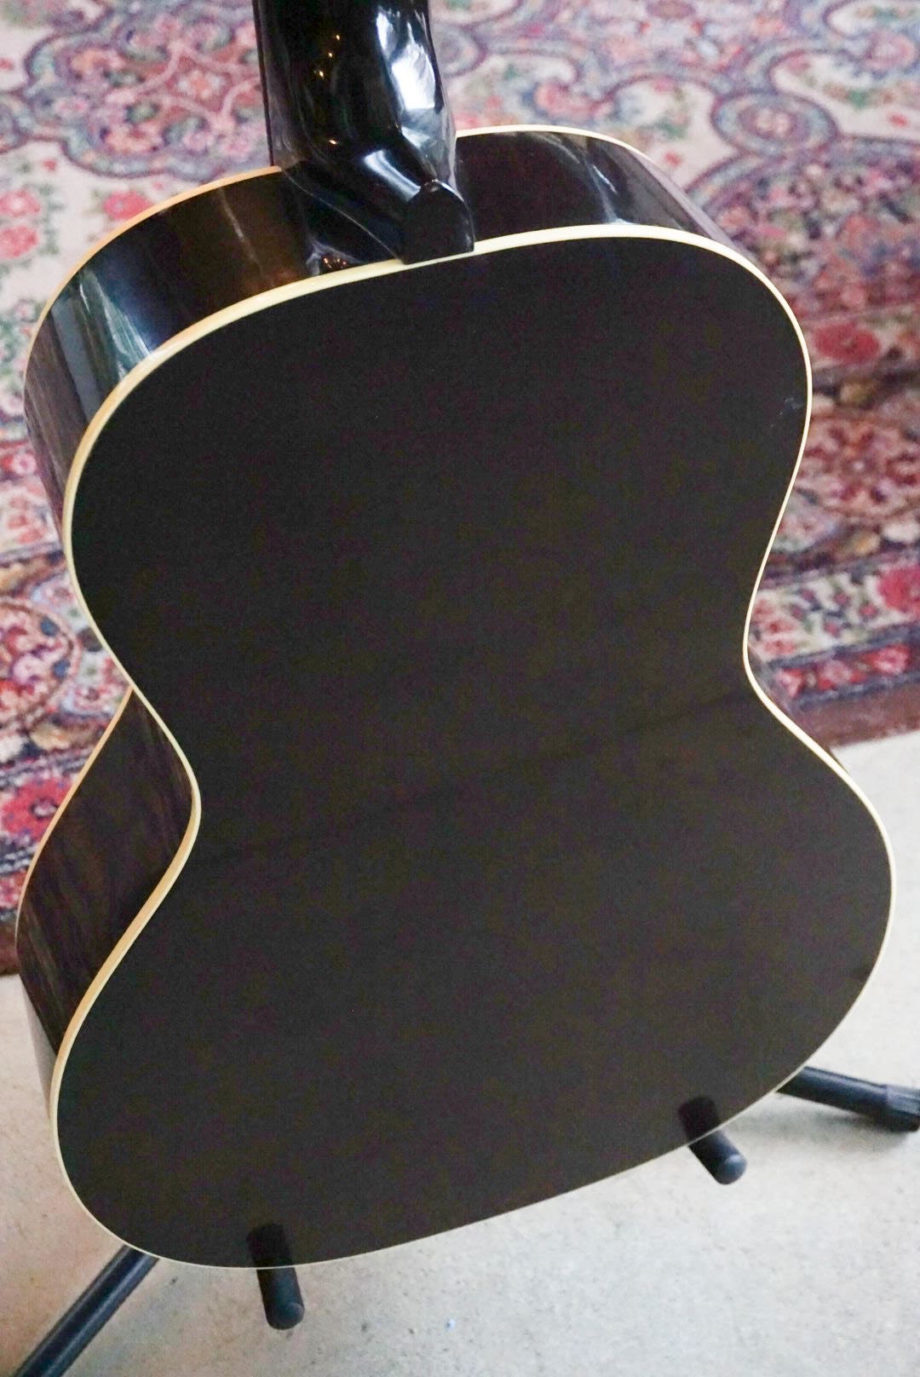 2015-2017 Gibson L-00 TV